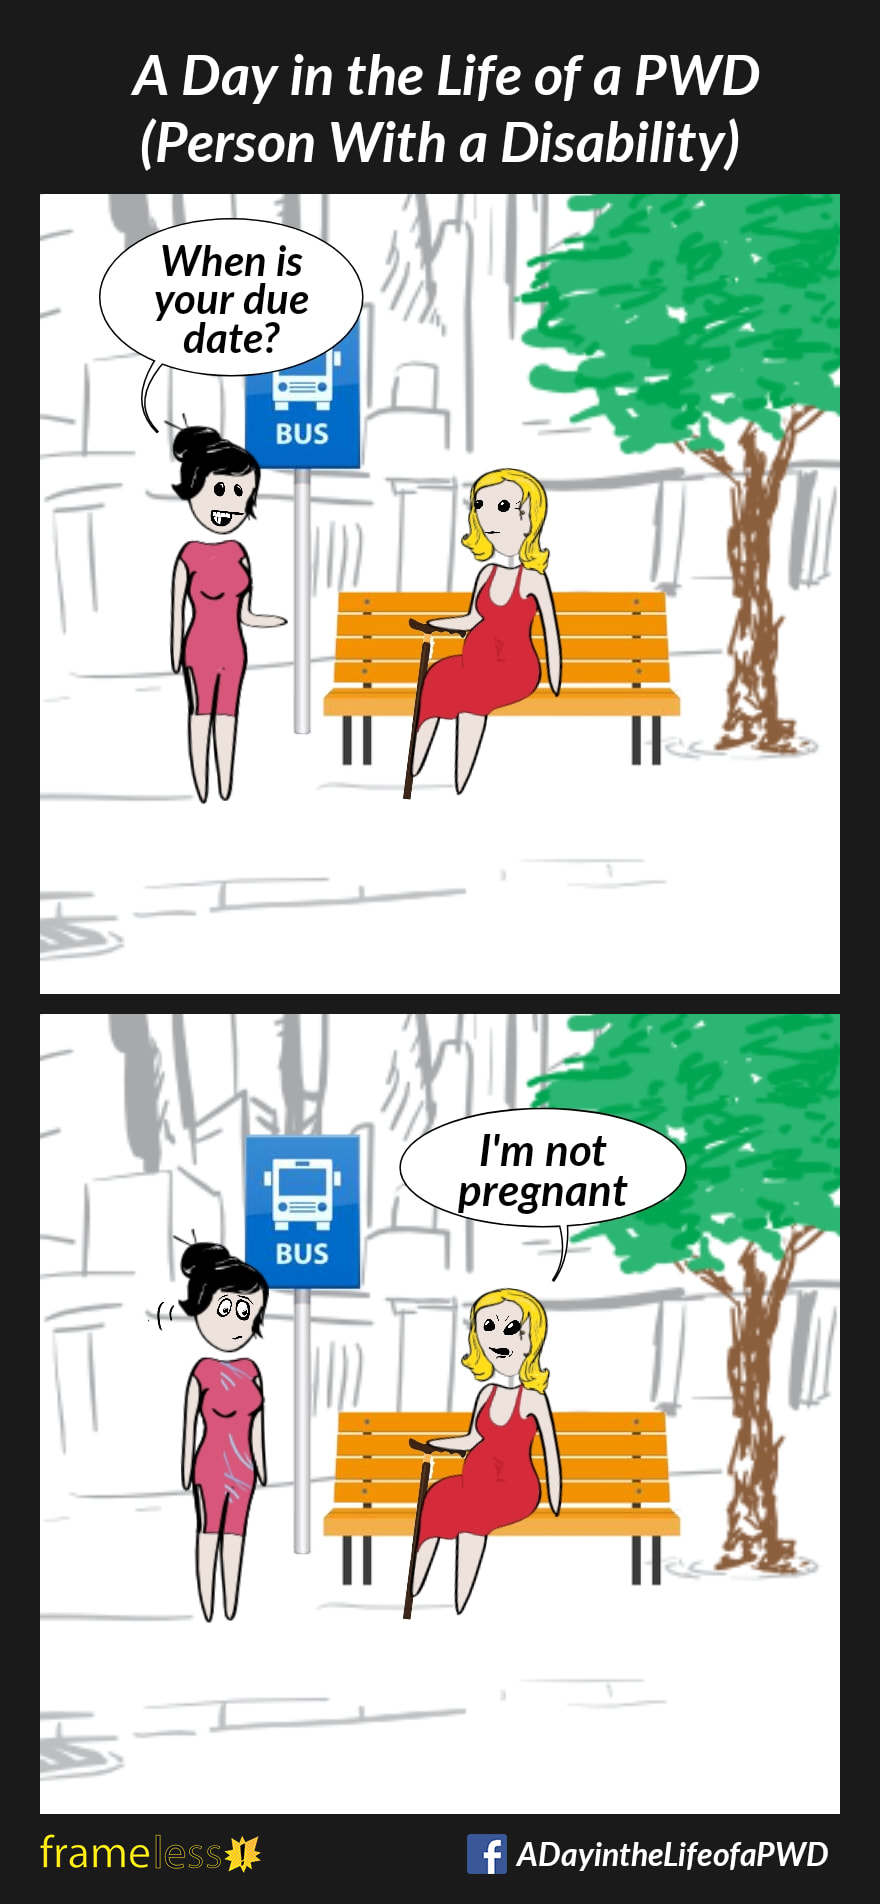 COMIC STRIP 
A Day in the Life of a PWD (Person With a Disability) 

Frame 1:
A woman with a bloated belly is sitting on a bench at a bus stop, holding her walking cane. A stranger approaches. 
STRANGER: When is your due date?

Frame 2:
WOMAN: I'm not pregnant